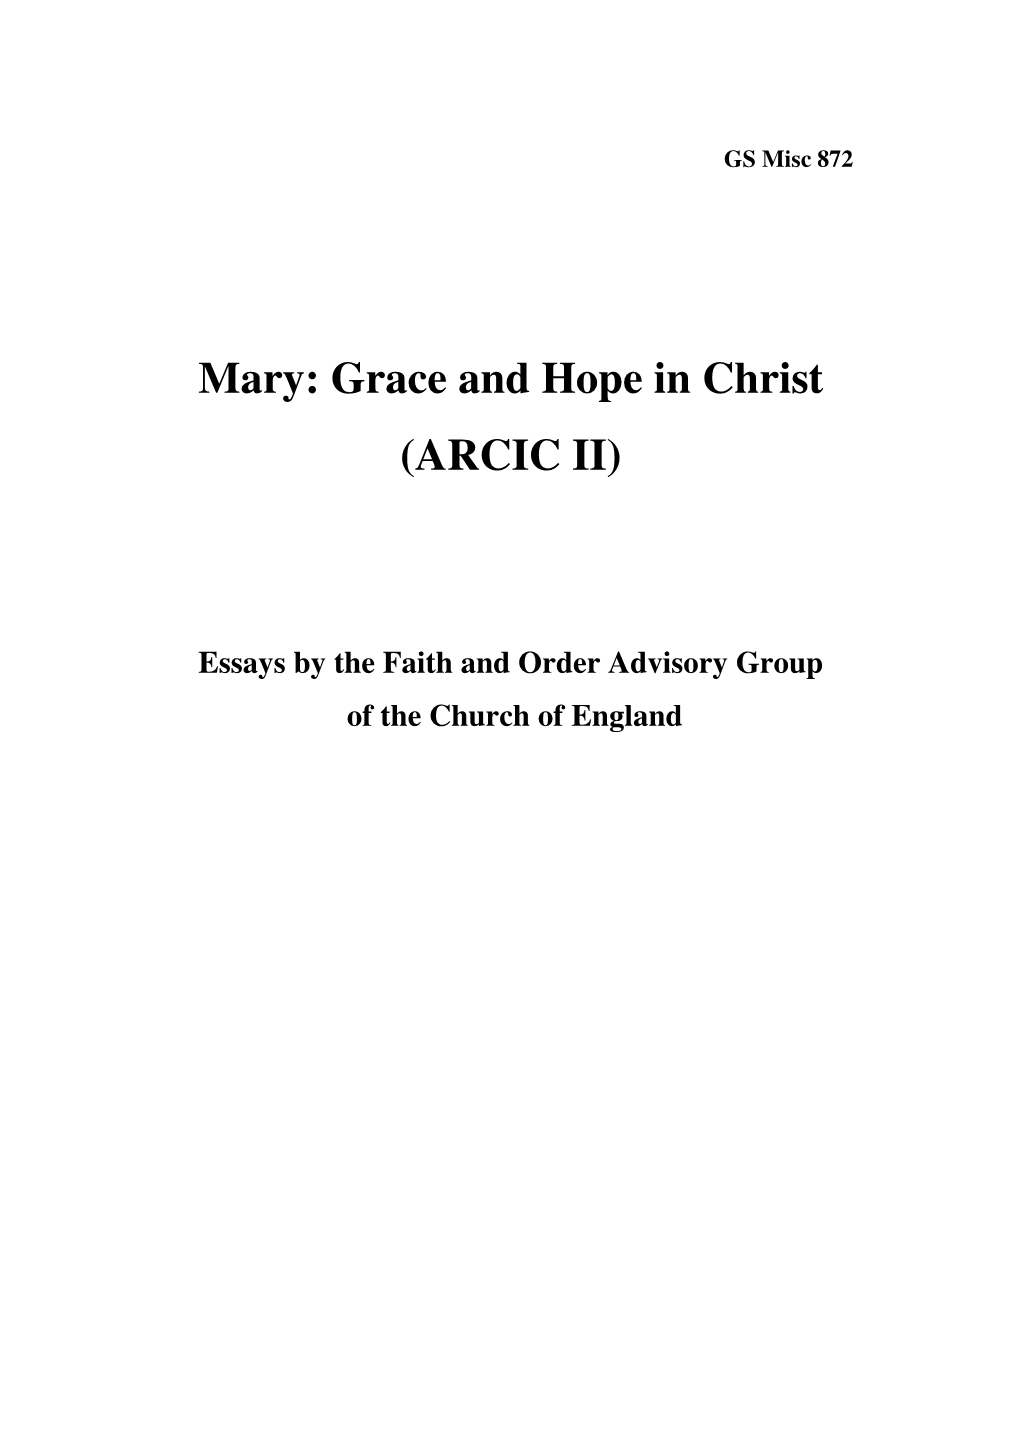 Mary: Grace and Hope in Christ (ARCIC II)